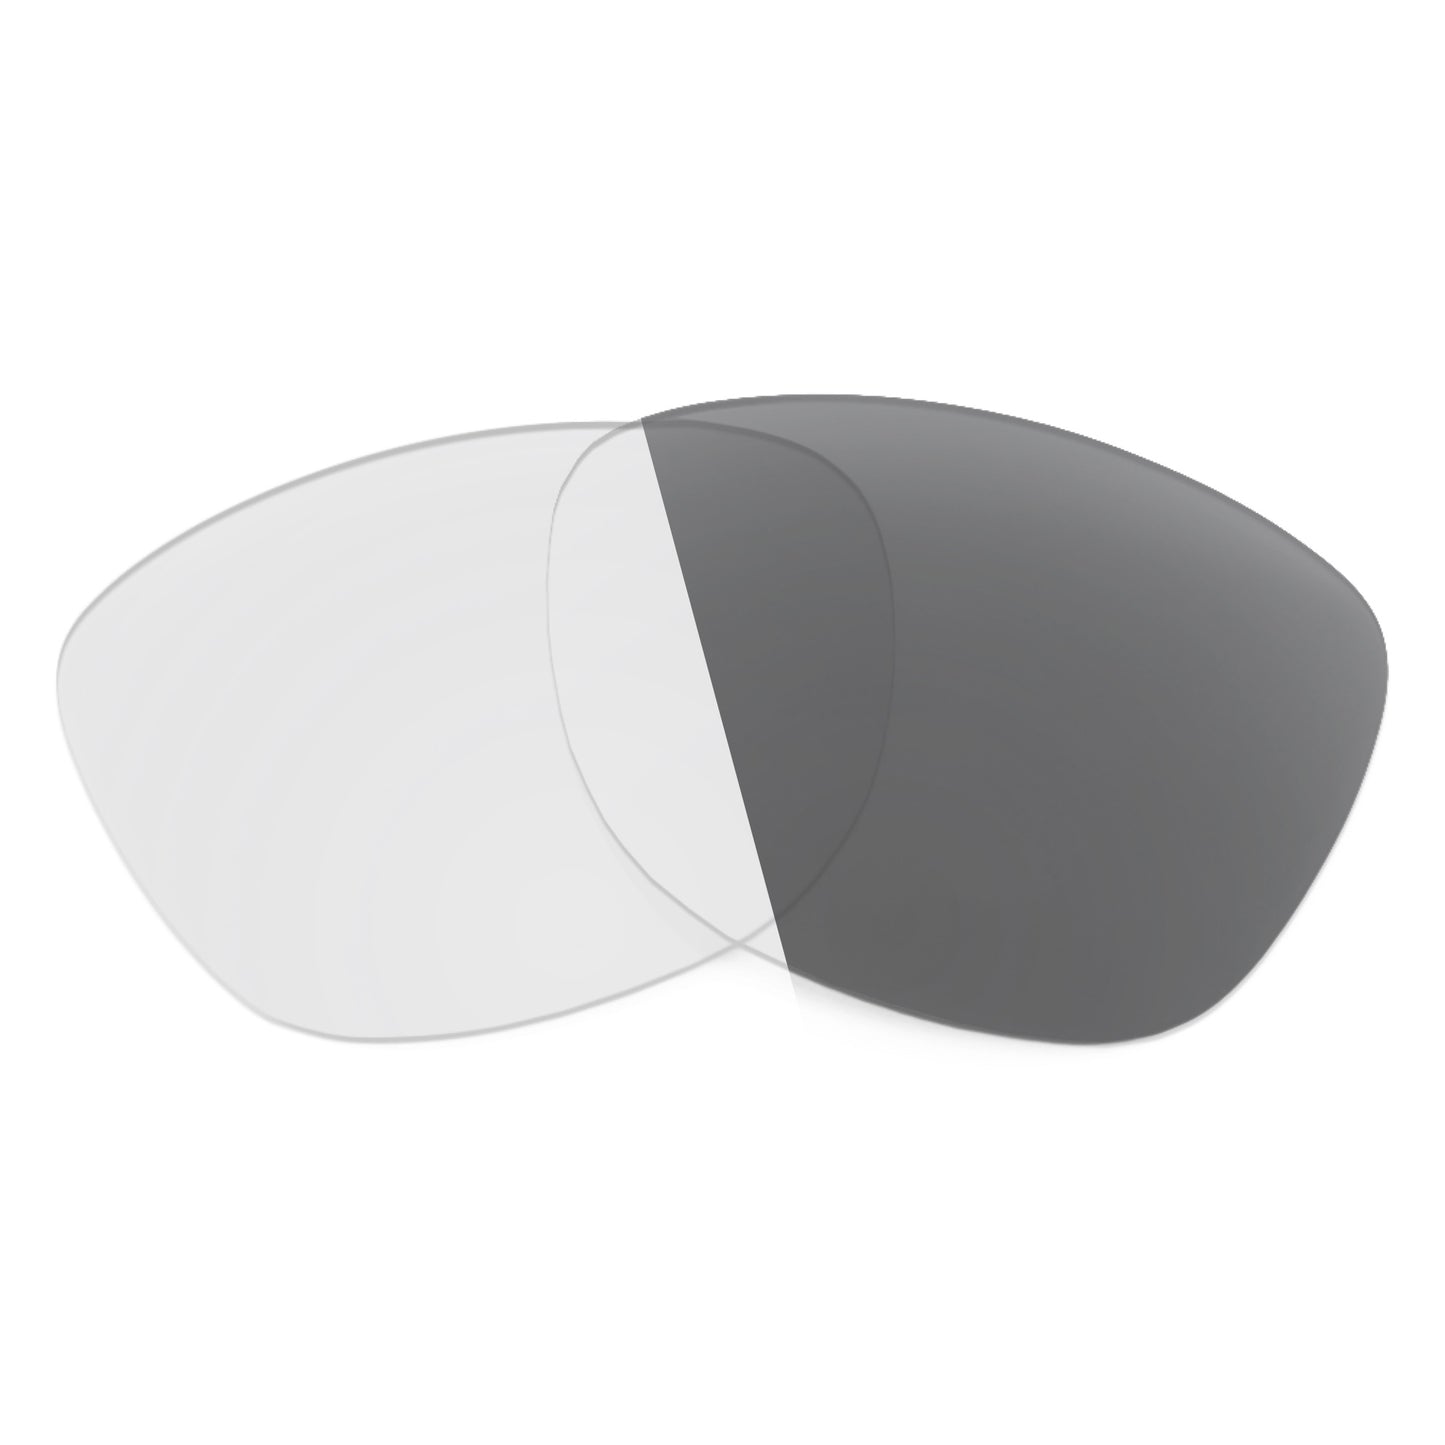 Revant replacement lenses for Ray-Ban RB4263 55mm Non-Polarized Adapt Gray Photochromic